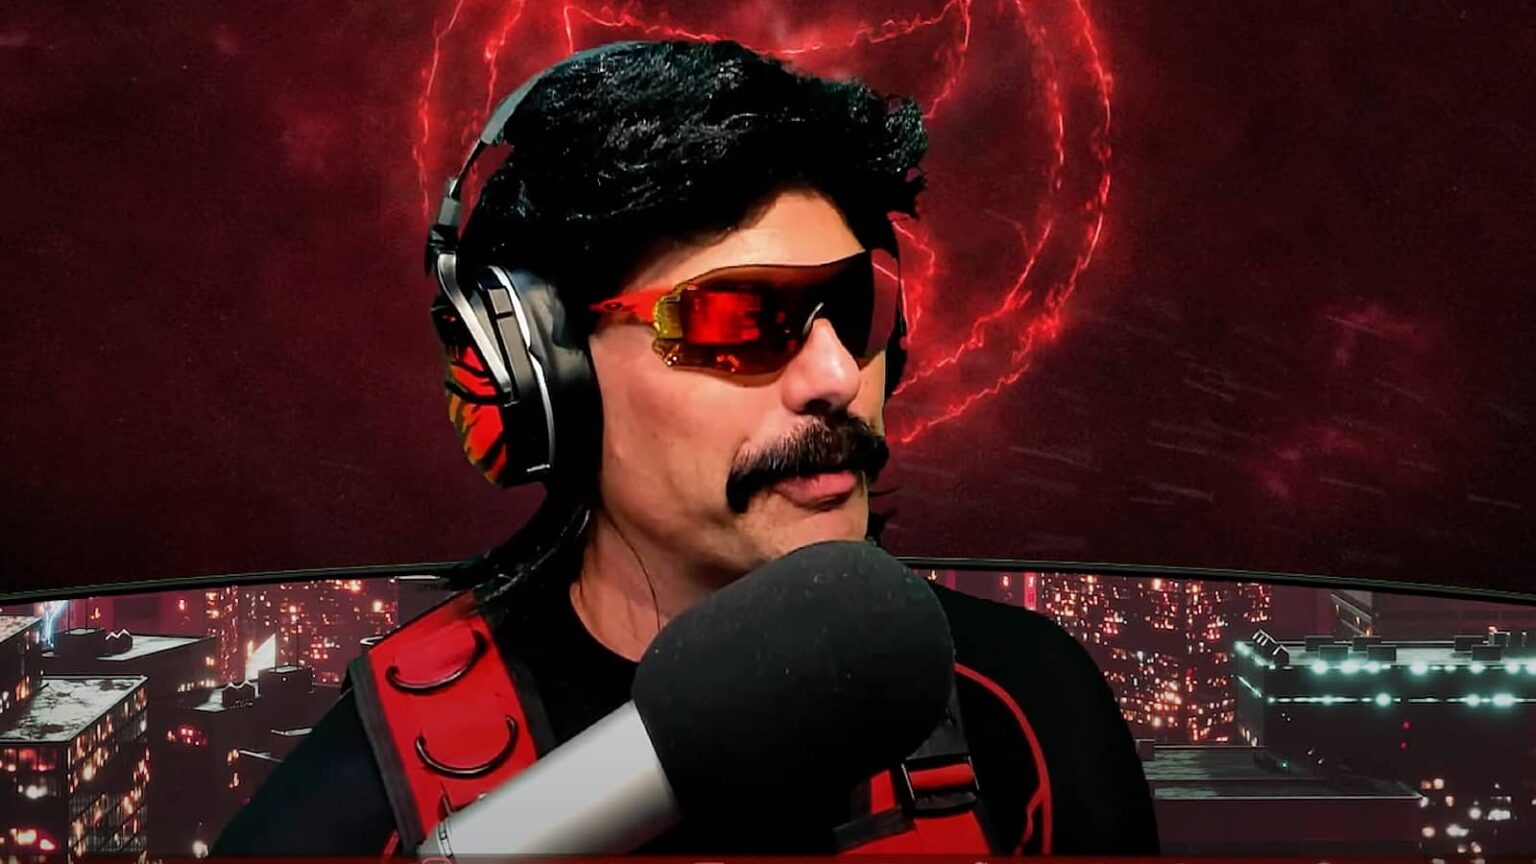 Streamer brings Dr Disrespect back to Twitch with a creative twist ...